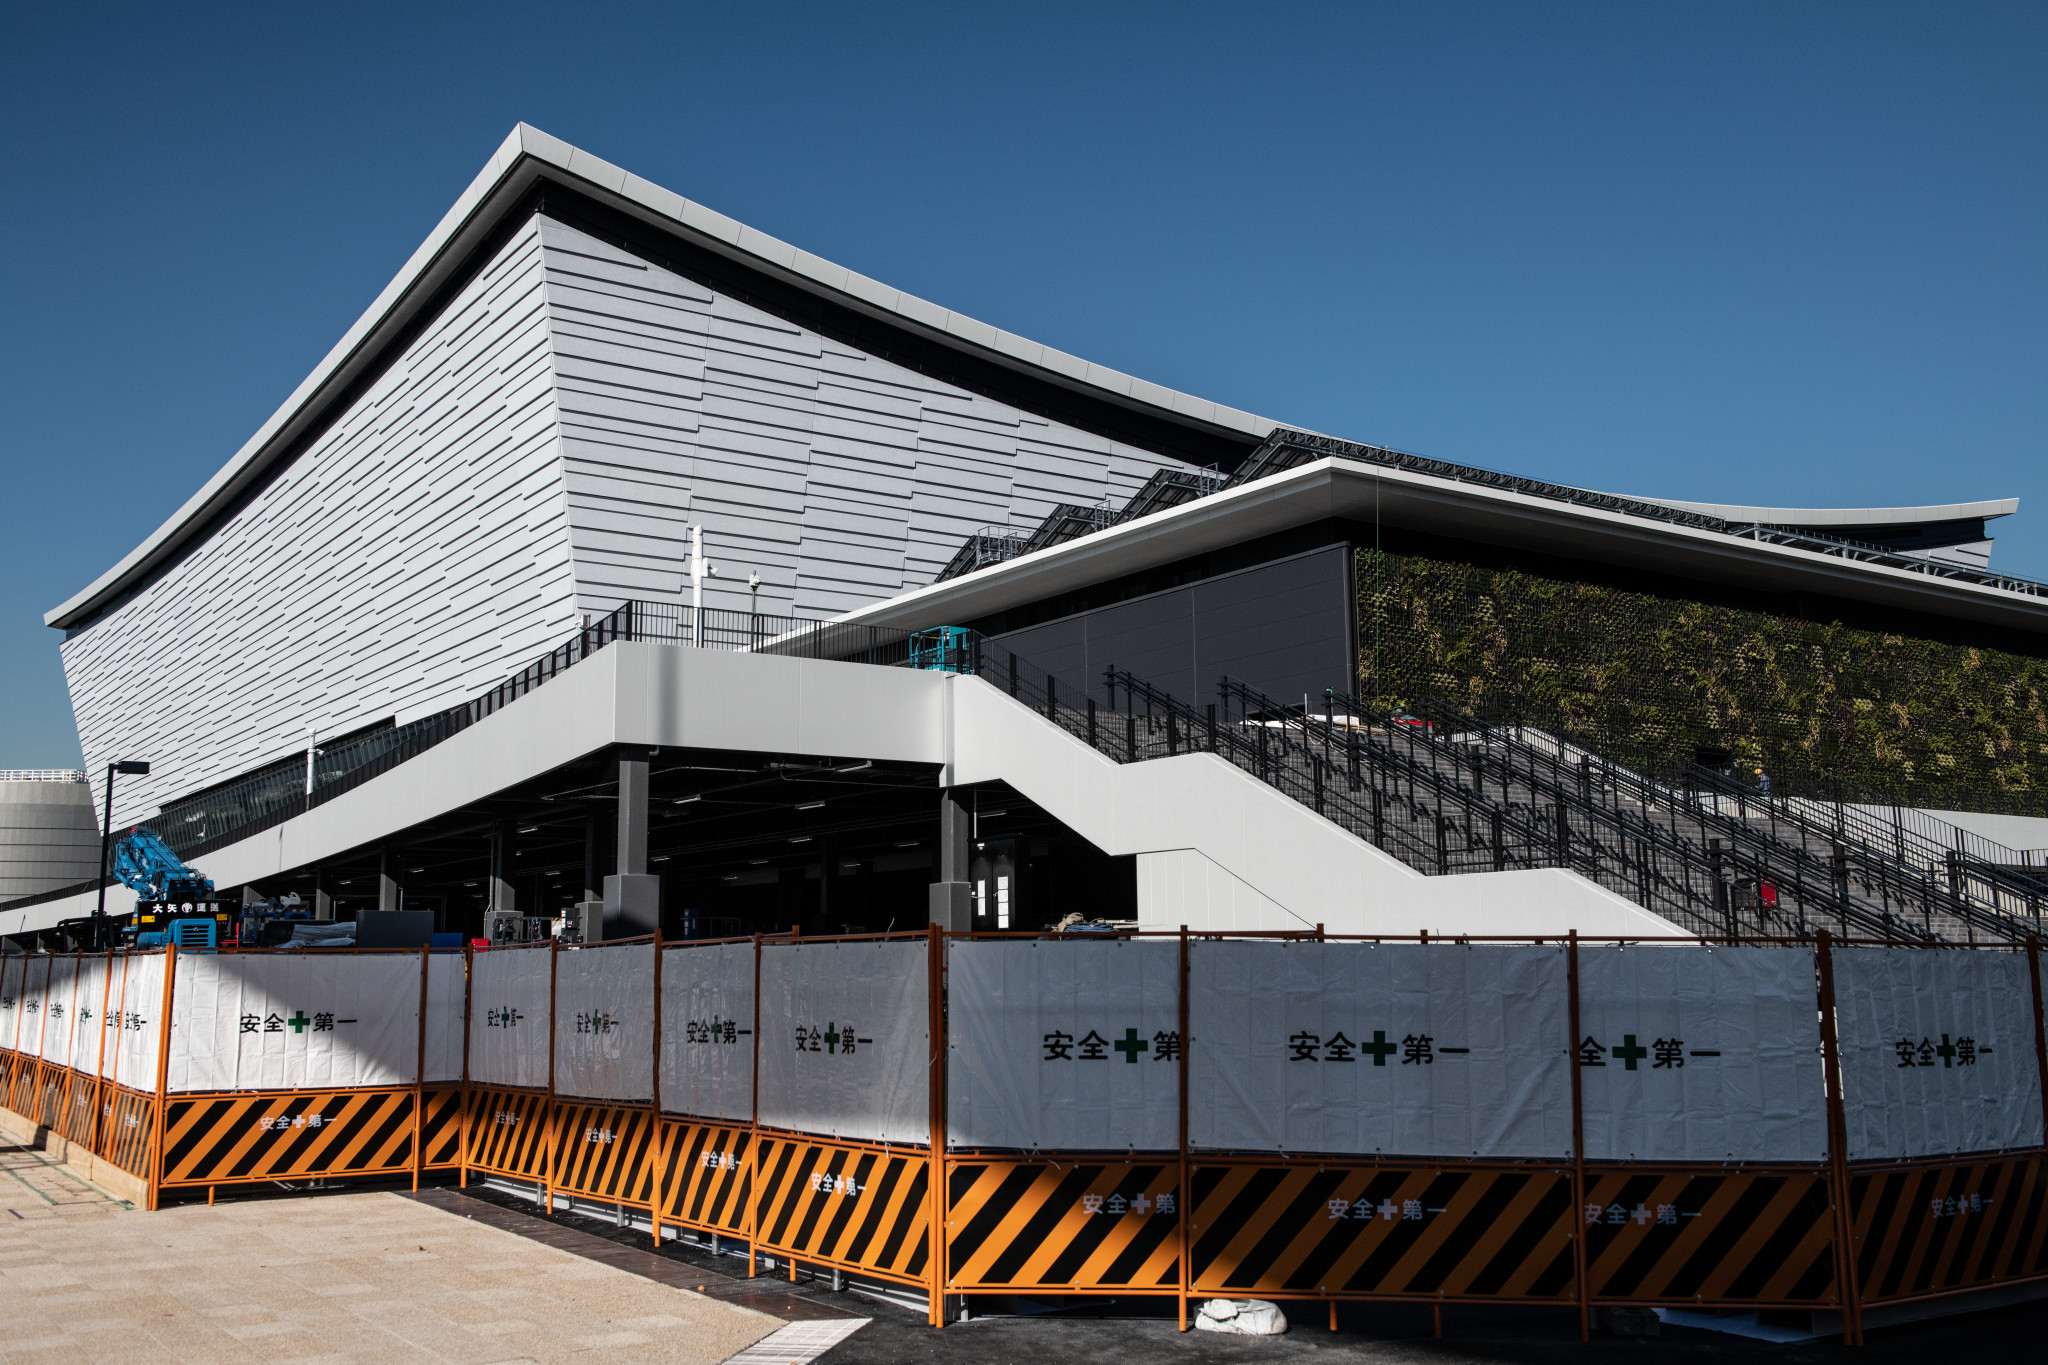 Opening dates confirmed for Ariake Arena and Tokyo Aquatic Centre